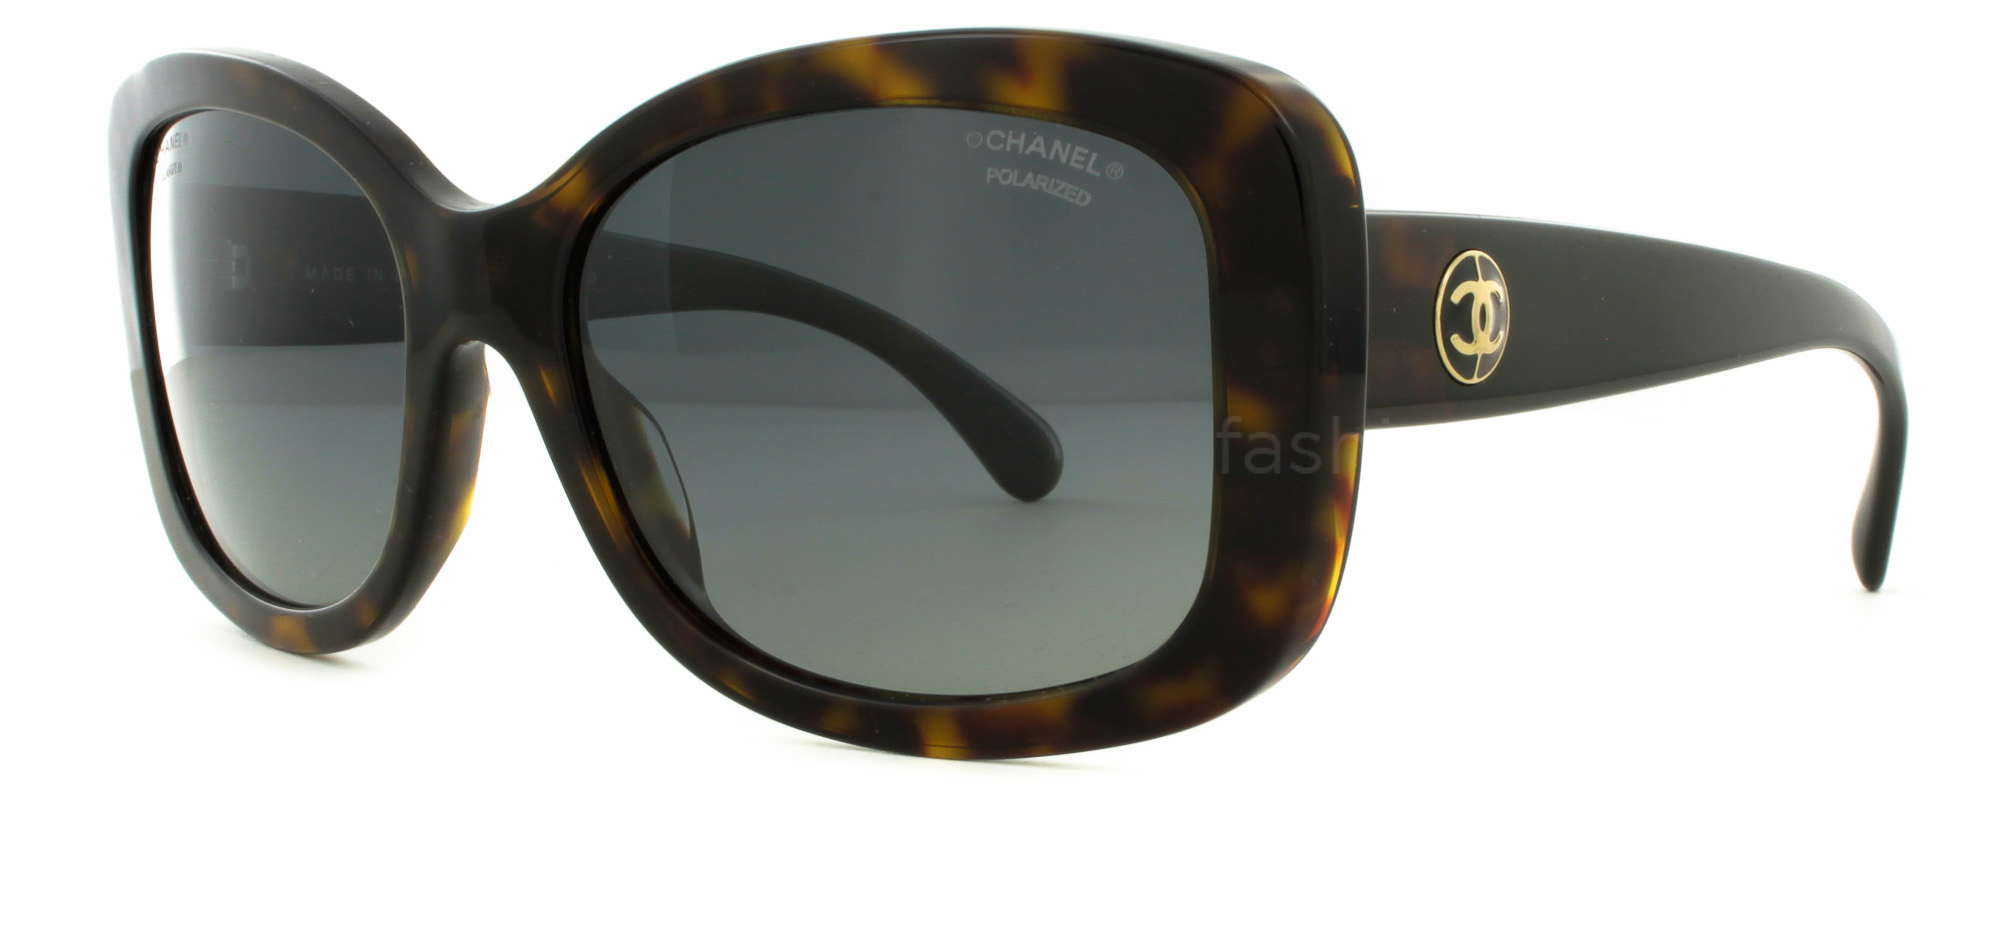 CHANEL 5322 714S8